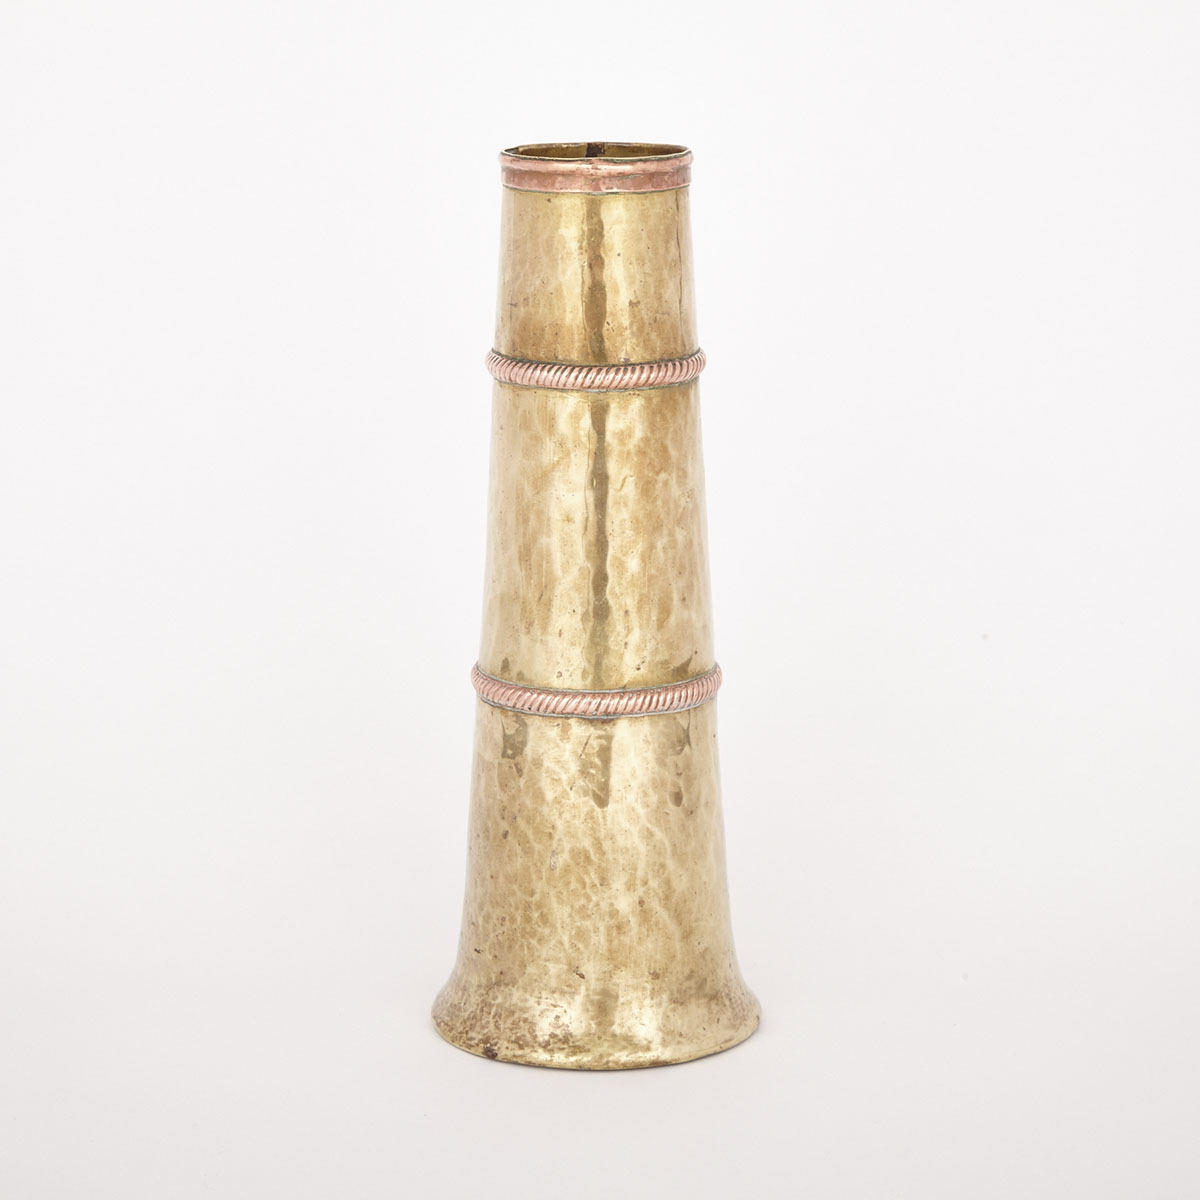 PAUL BEAU (1871-1941) BRASS  and copper Vase, MONTREAL, EARLY 20TH CENTURY
